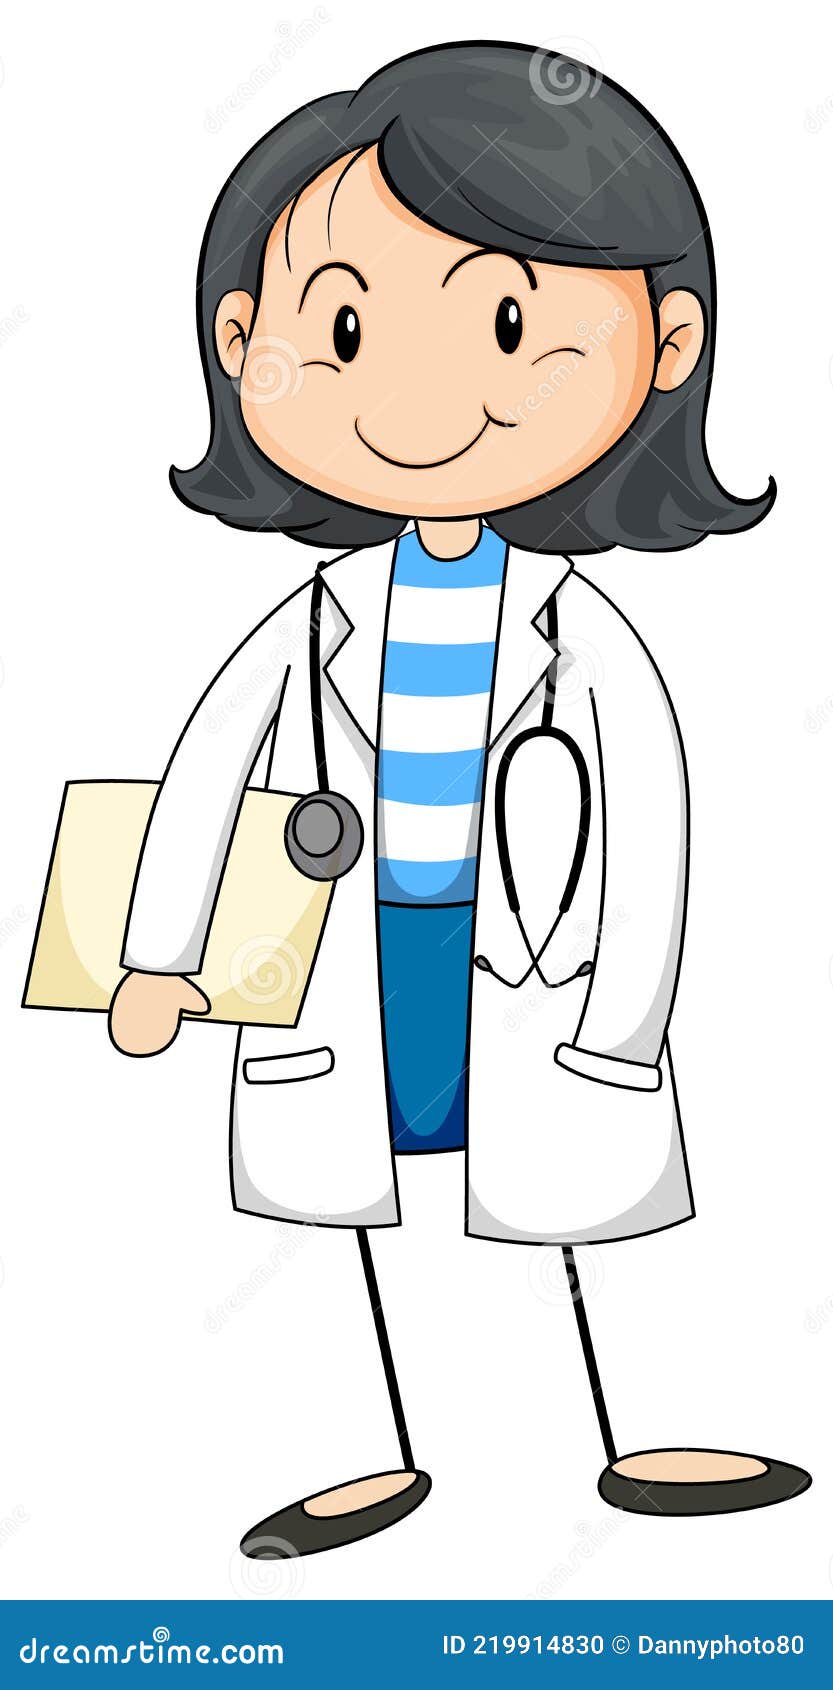 Female Doctor Cartoon Character Isolated Stock Vector - Illustration of  elementary, doodle: 219914830